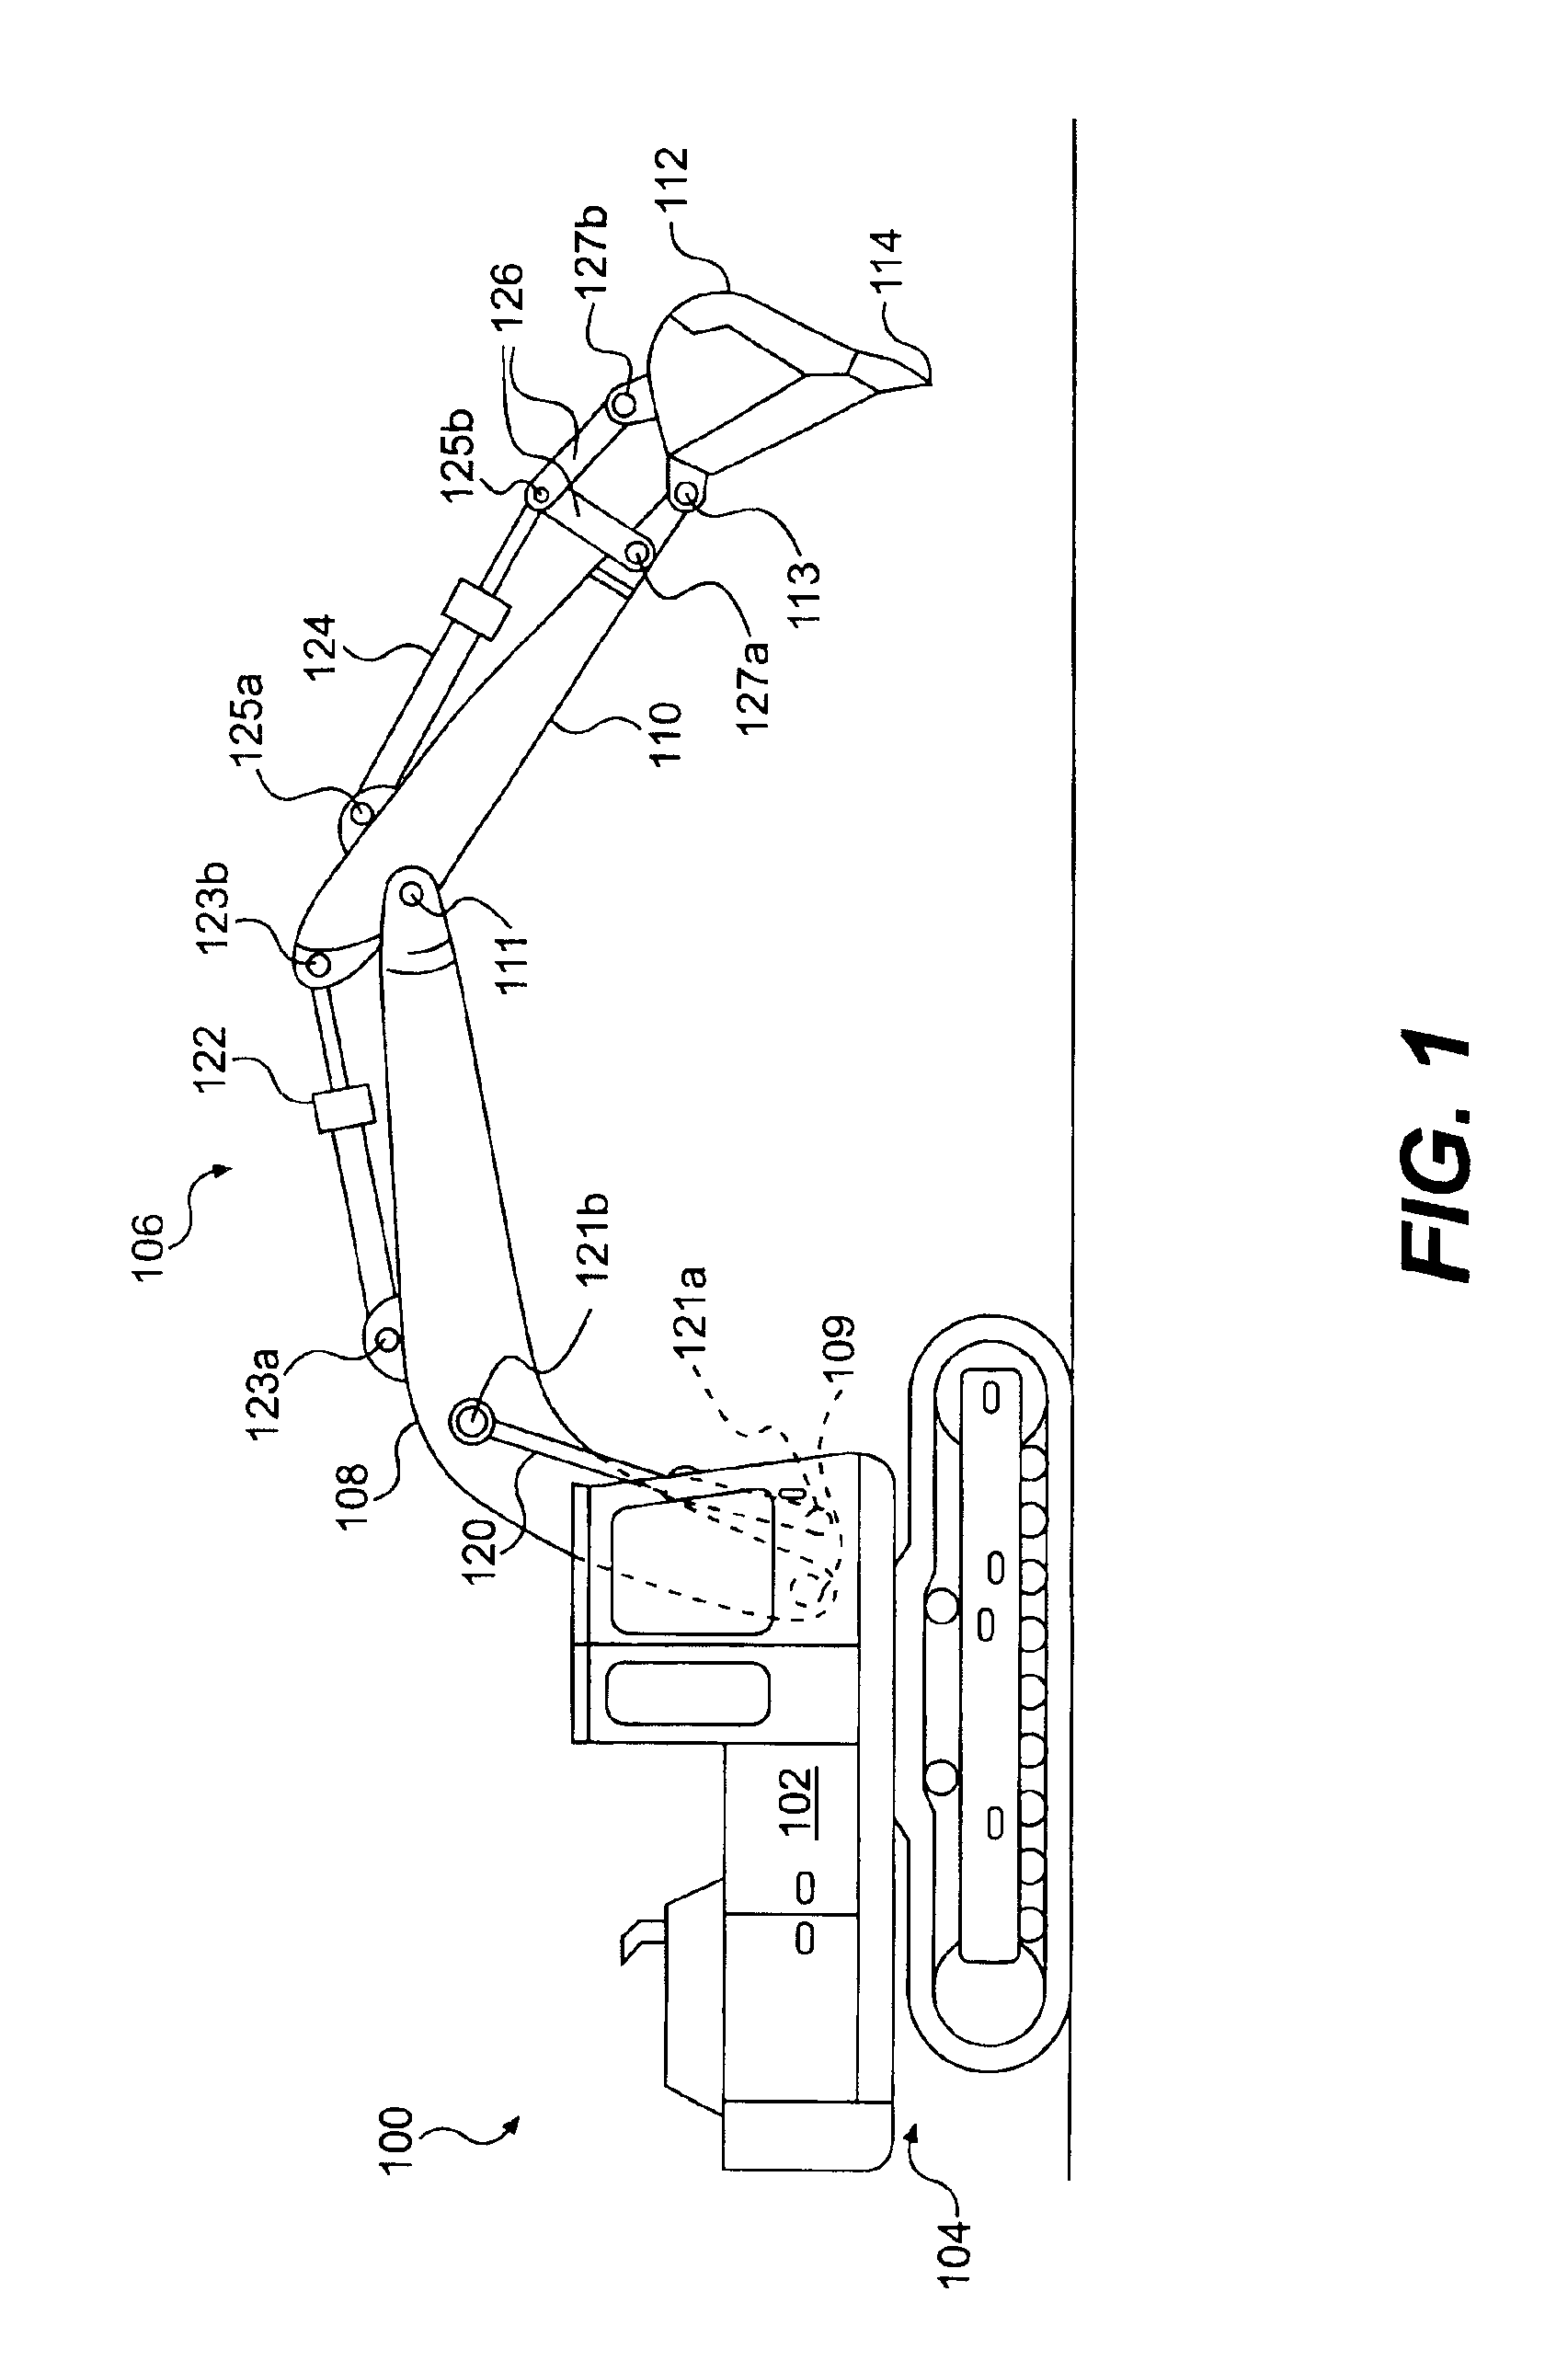 System for determining an implement arm position